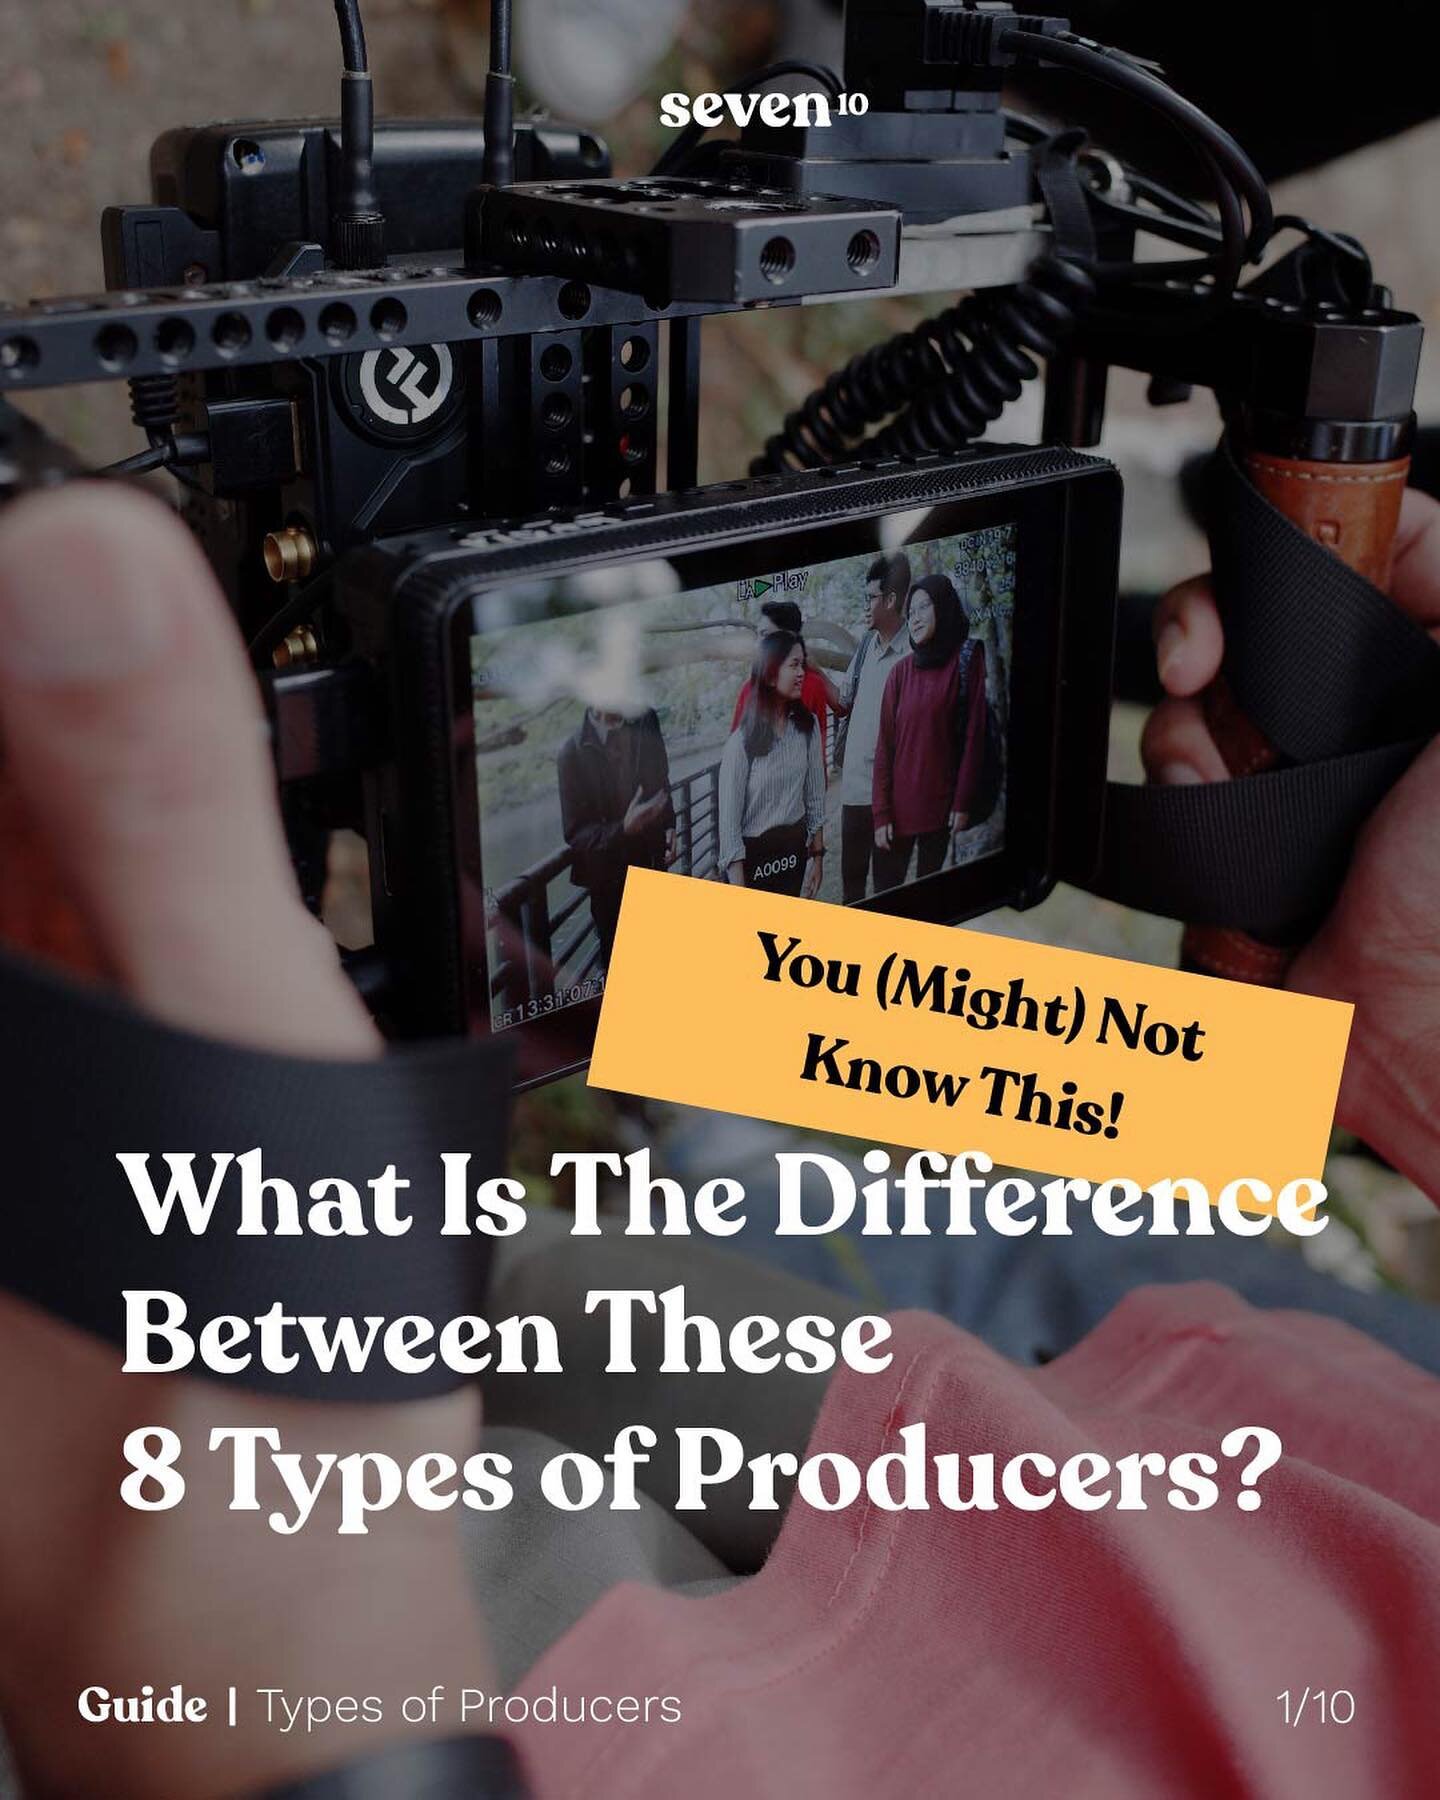 So here you have it, the difference among these eight producer types. Do you have any experiences or intriguing stories involving any of these roles? Share in comment below!

#filmproducer #documentaries #filmmakersworld #seven10guide